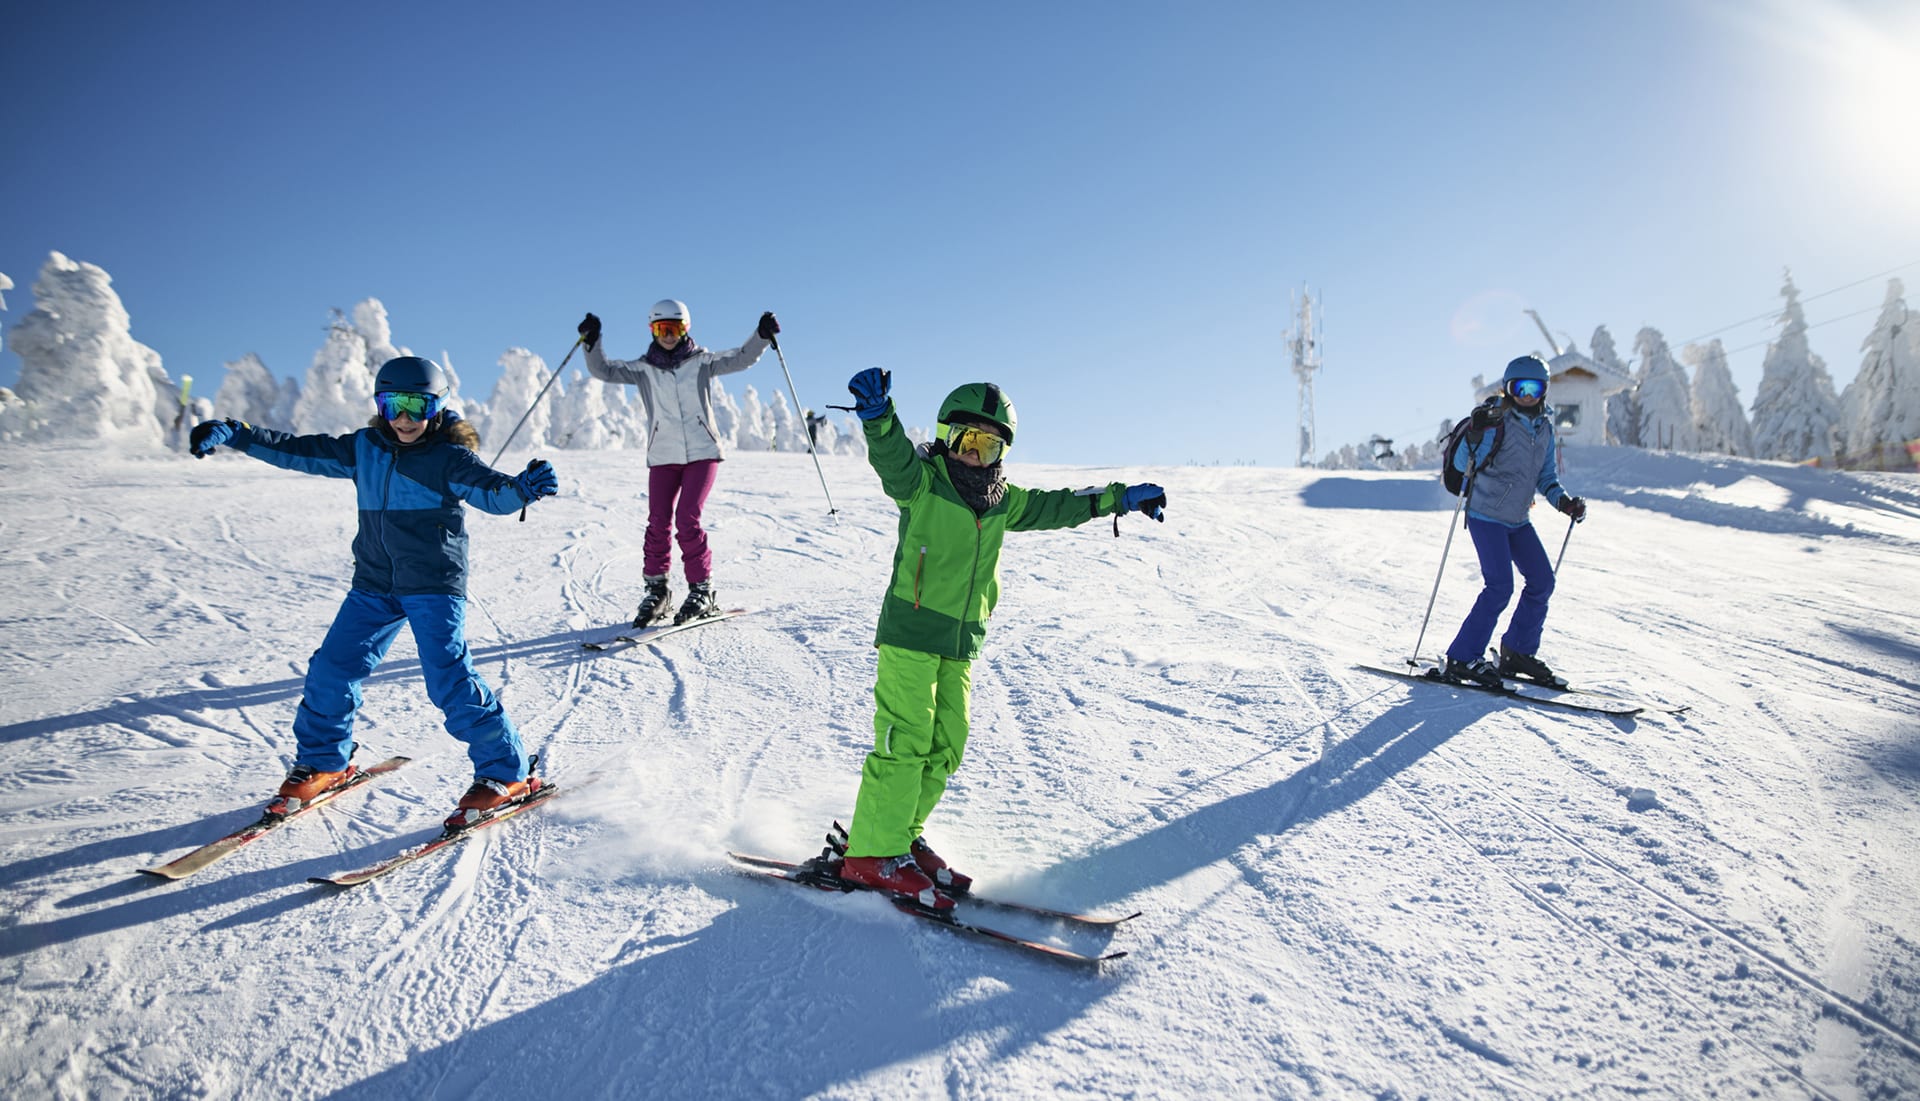 Family having fun skiing together on winter day.